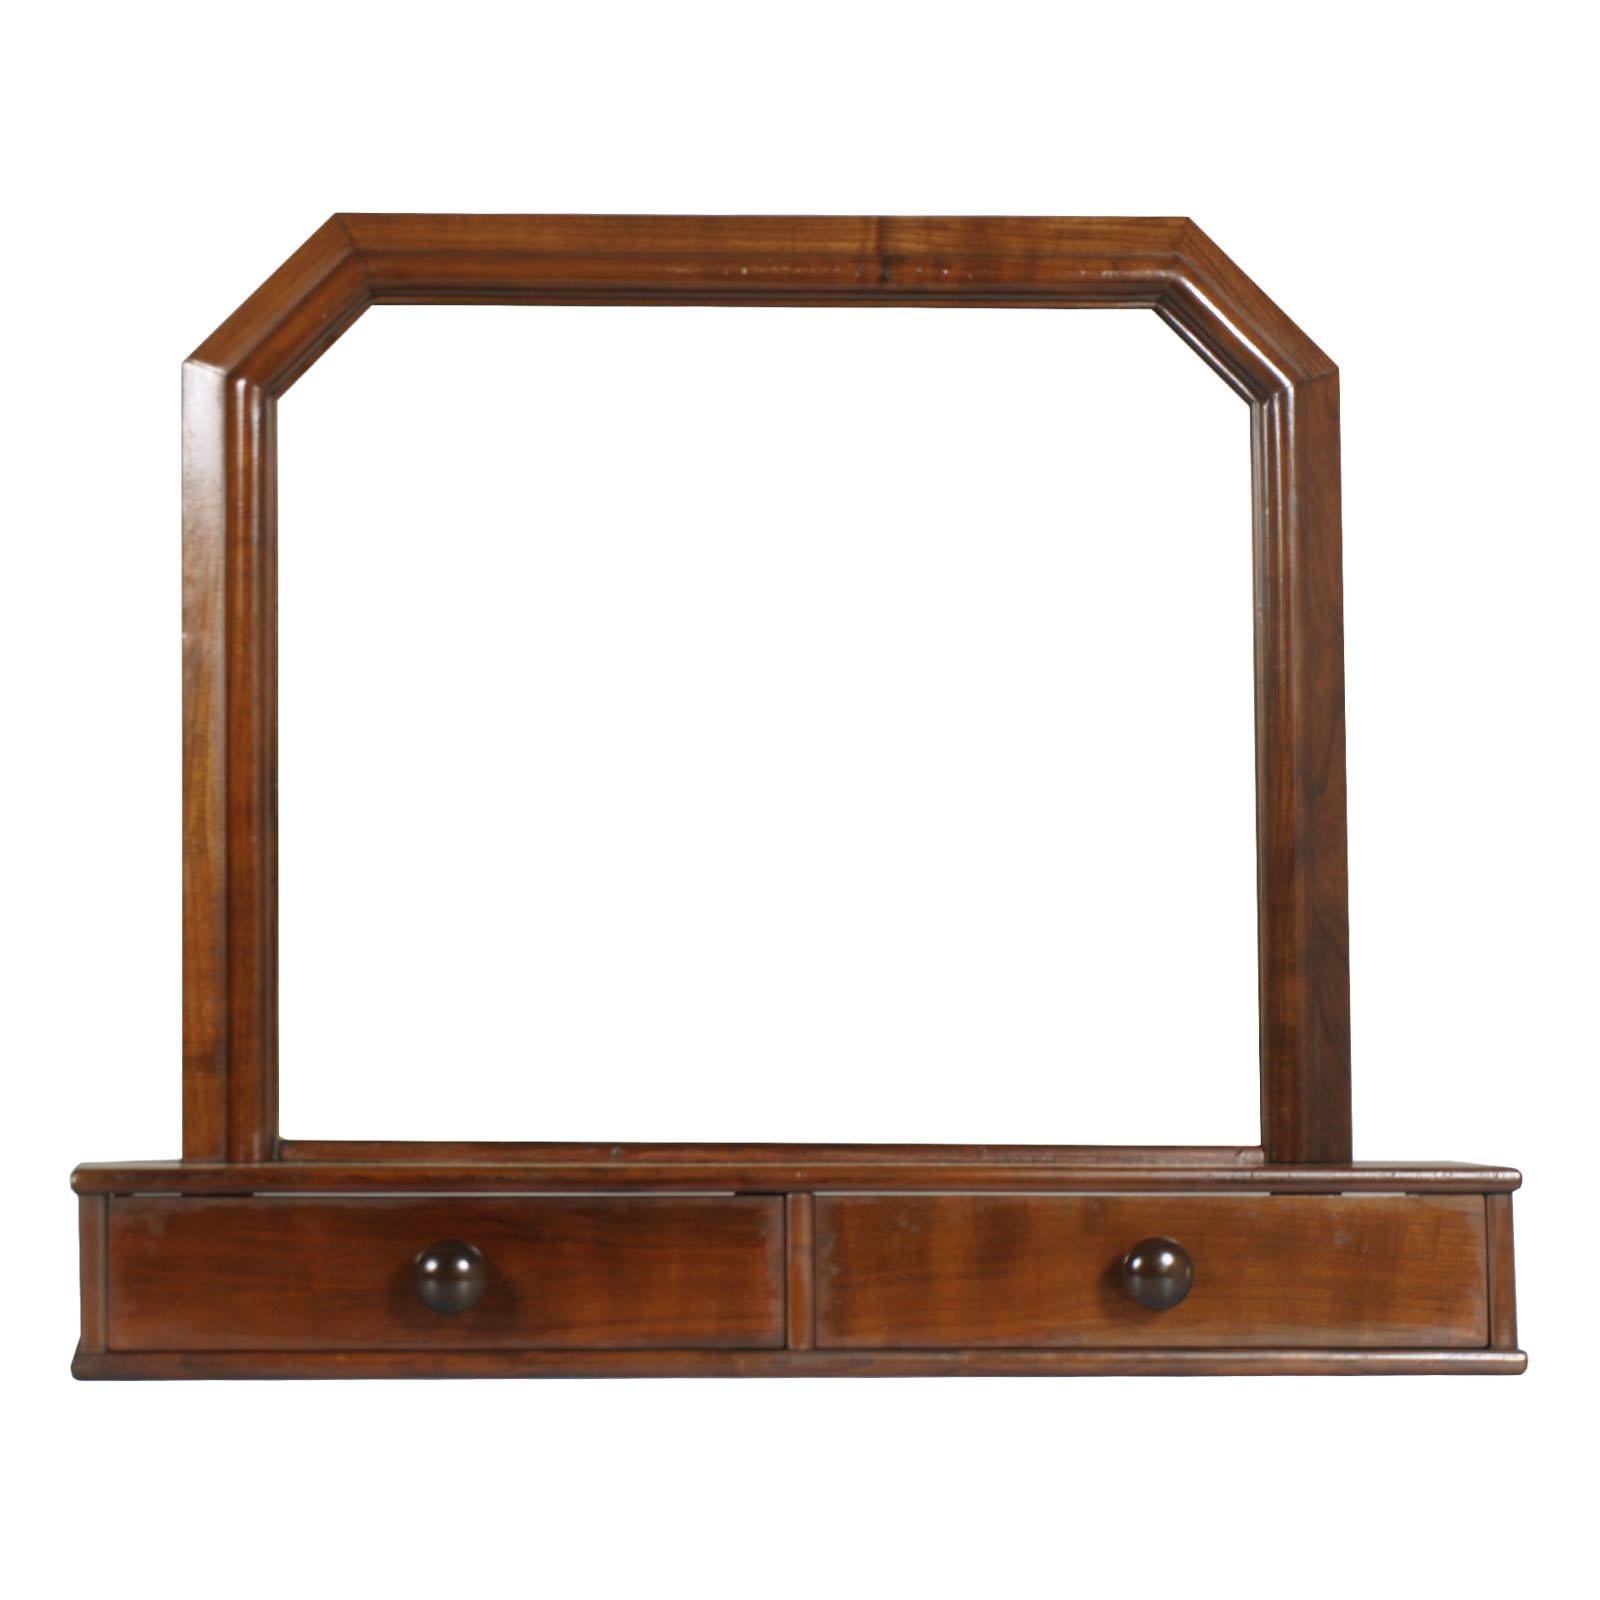 Italian Art Deco Mirror Dressing Table, Psyche Mirror in Walnut with Two Drawers In Good Condition For Sale In Vigonza, Padua